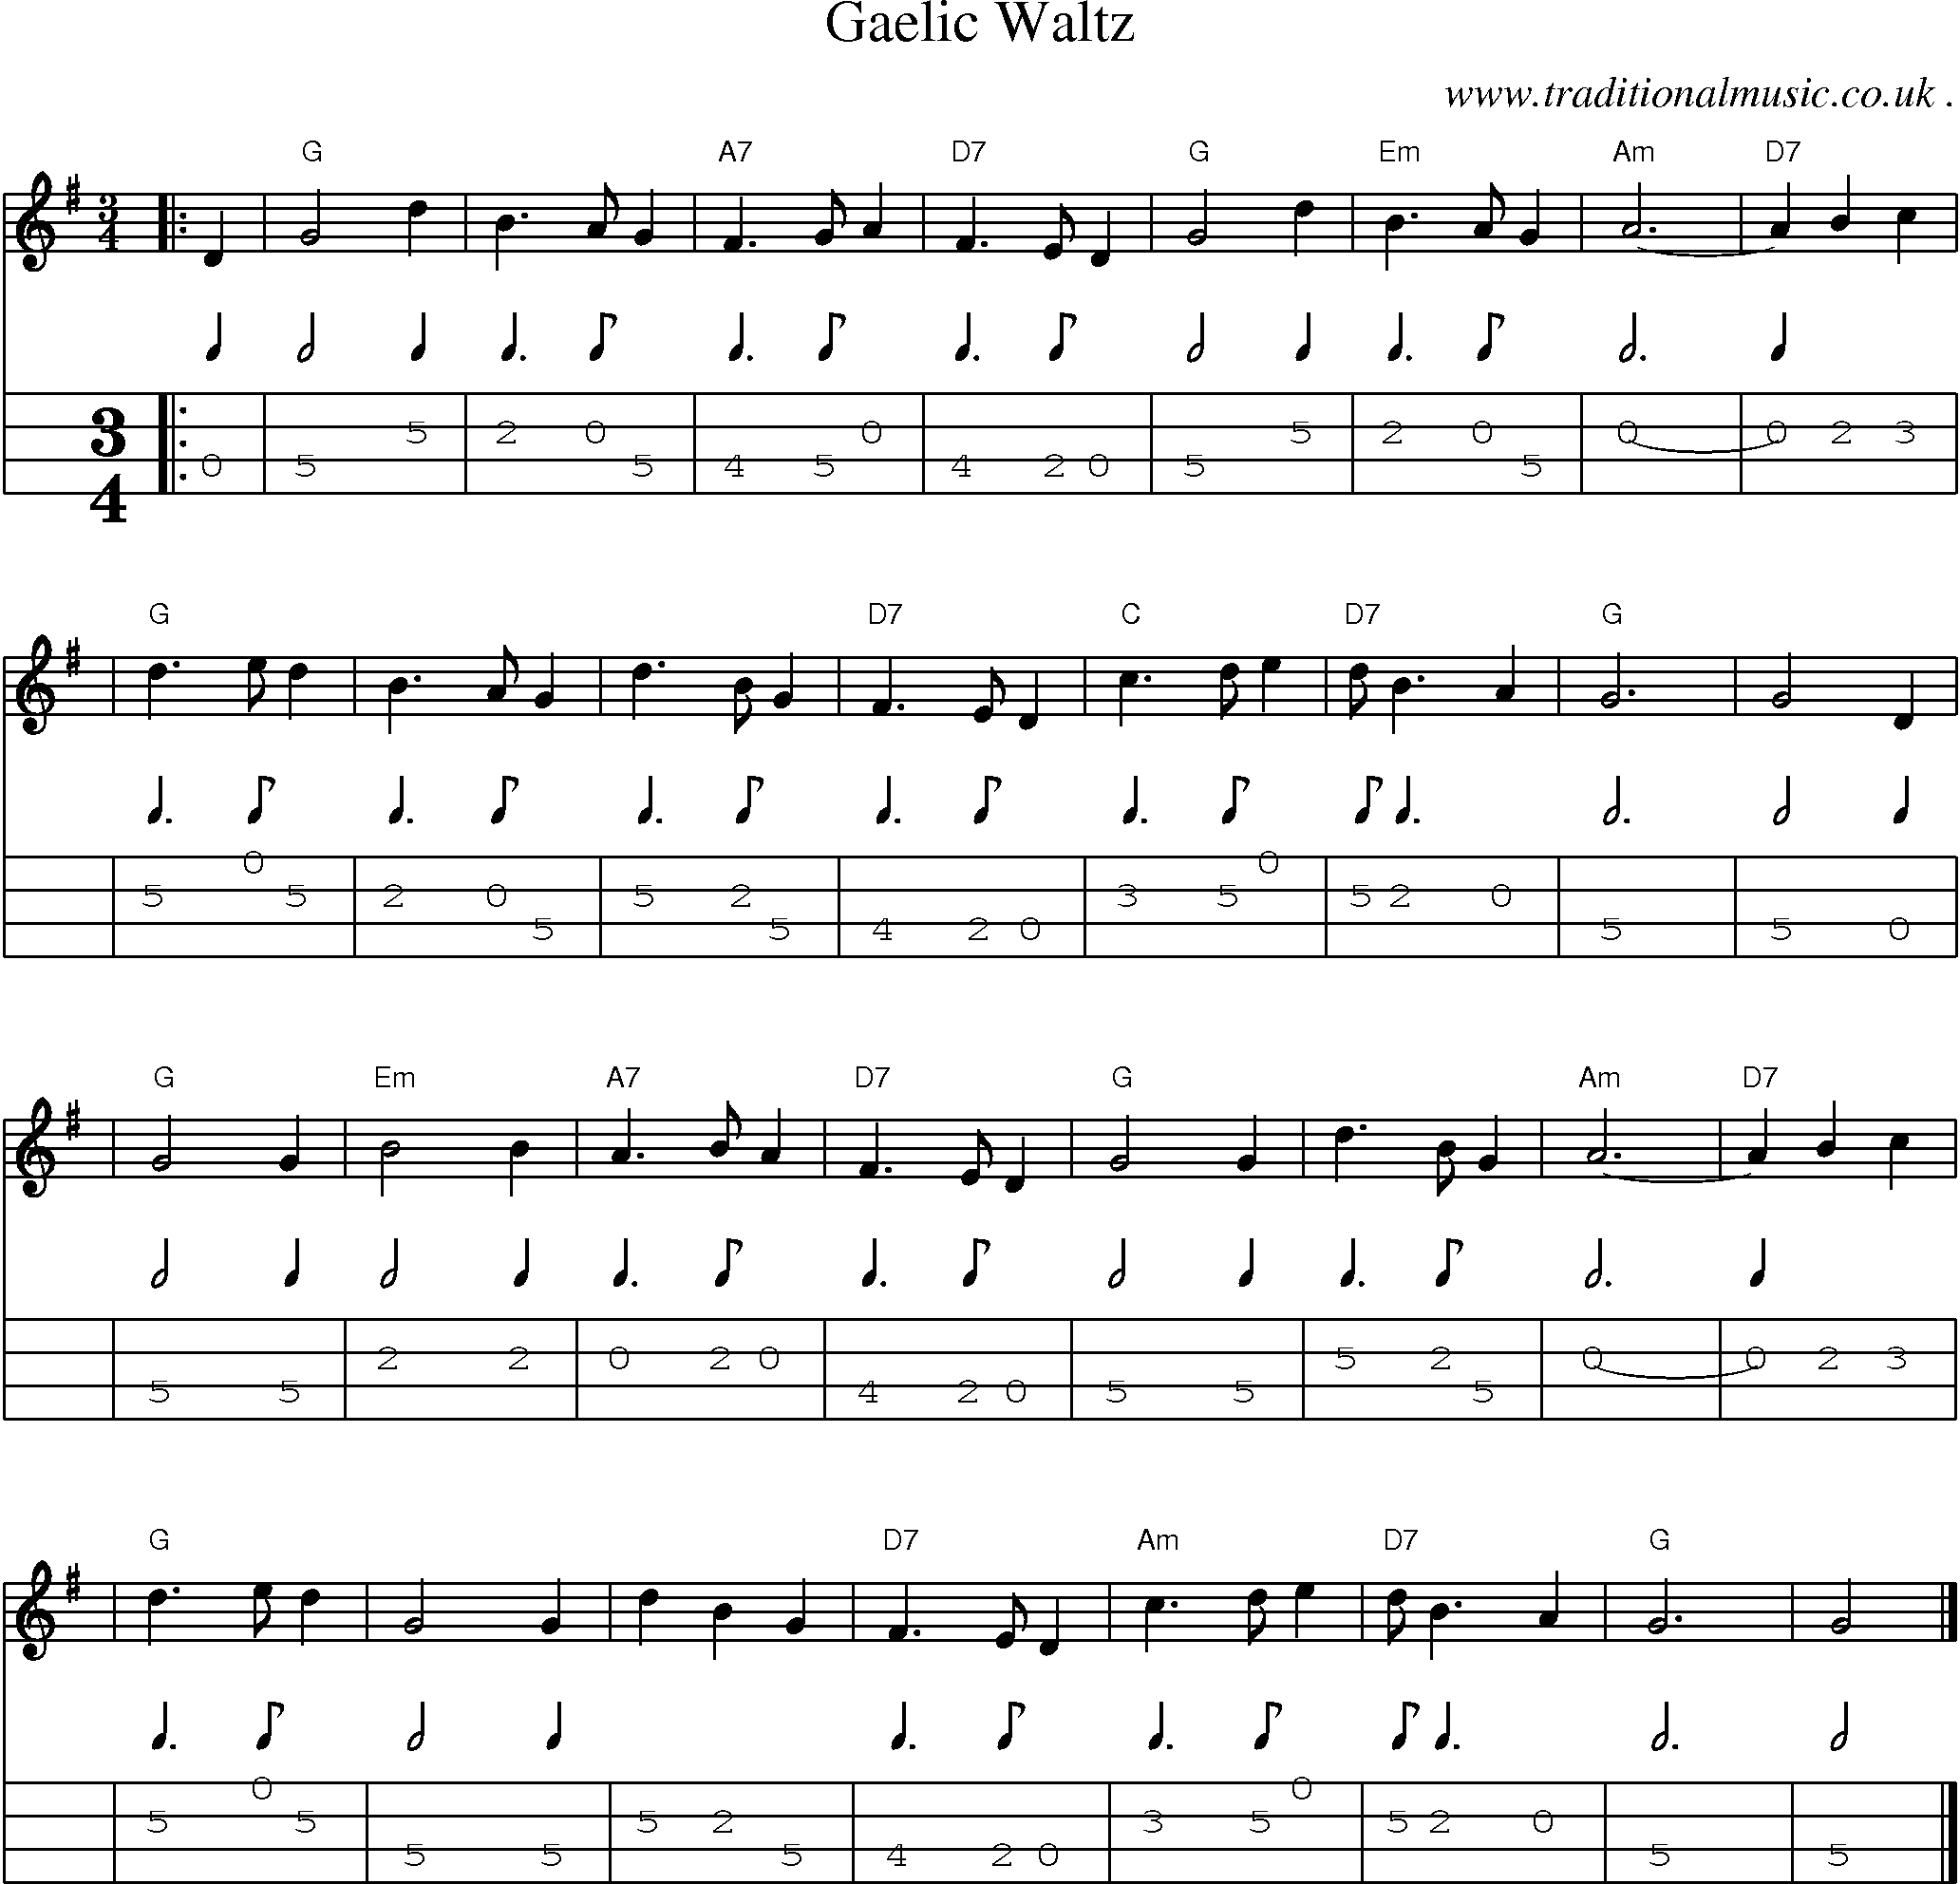 Sheet-music  score, Chords and Mandolin Tabs for Gaelic Waltz